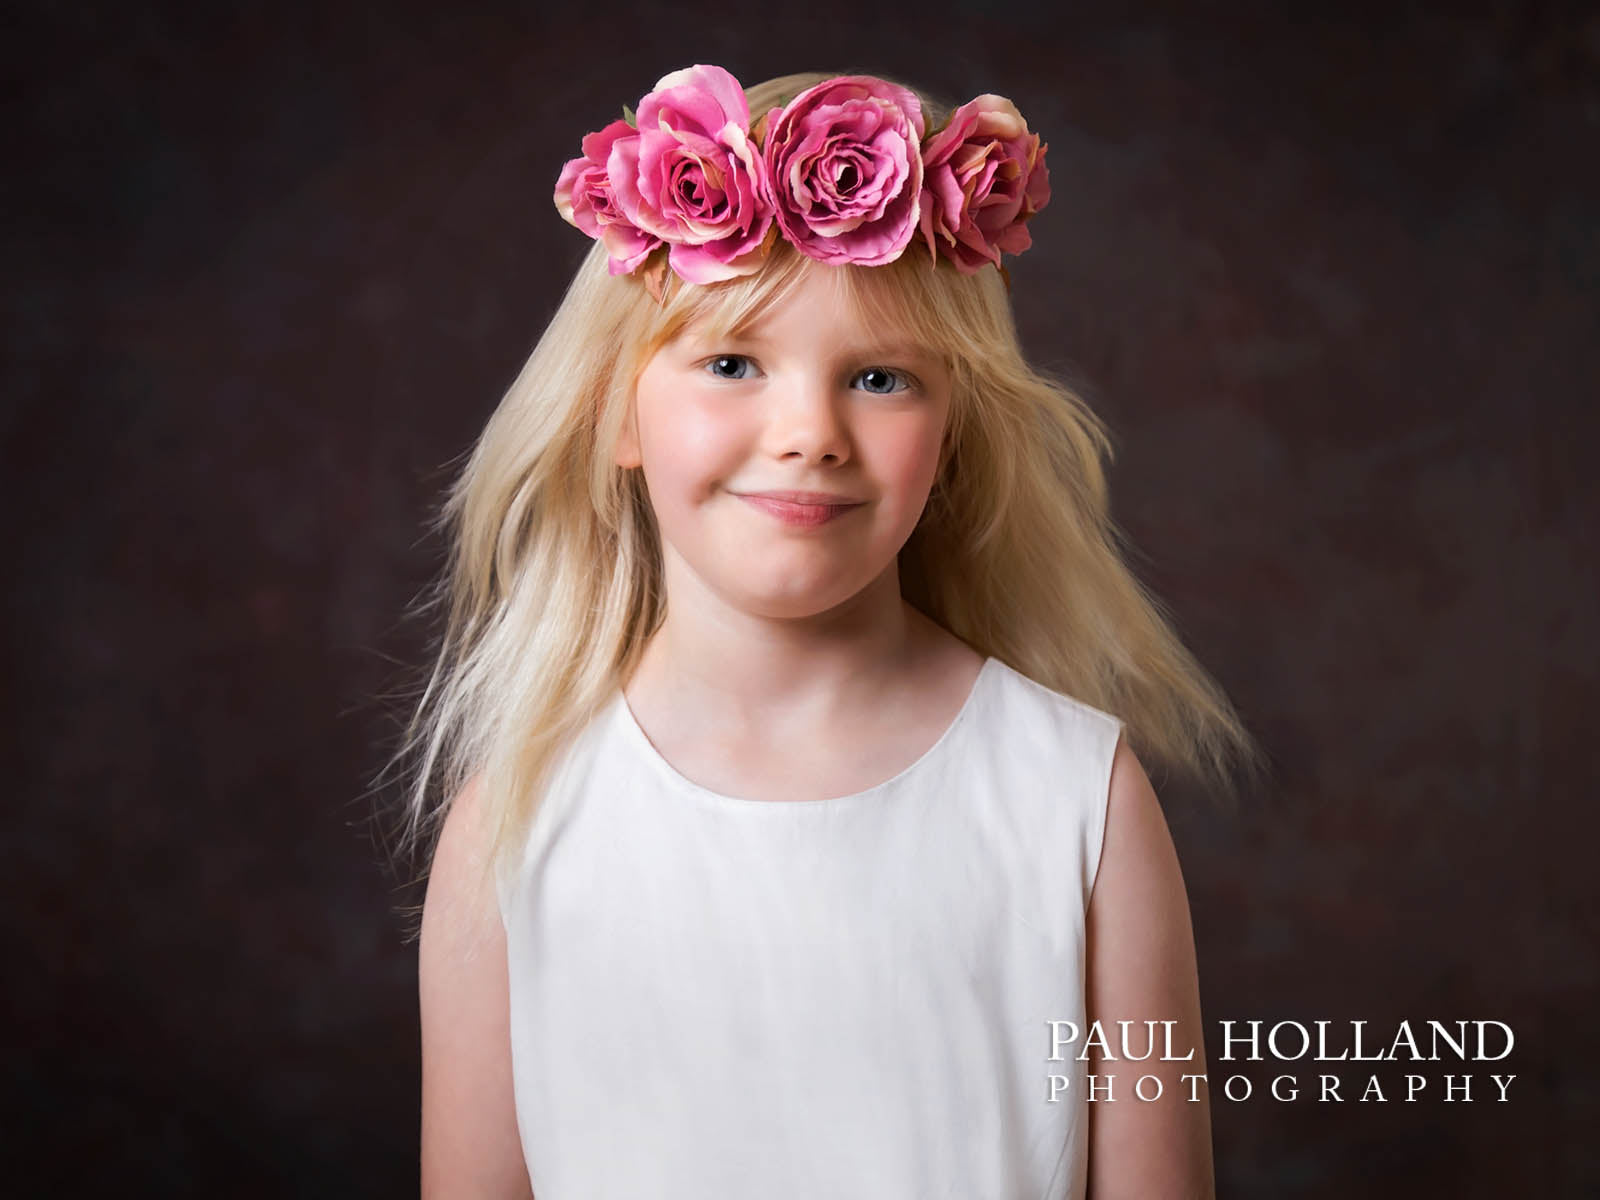 Photo Shoot & Gallery Wall Art Gift Package